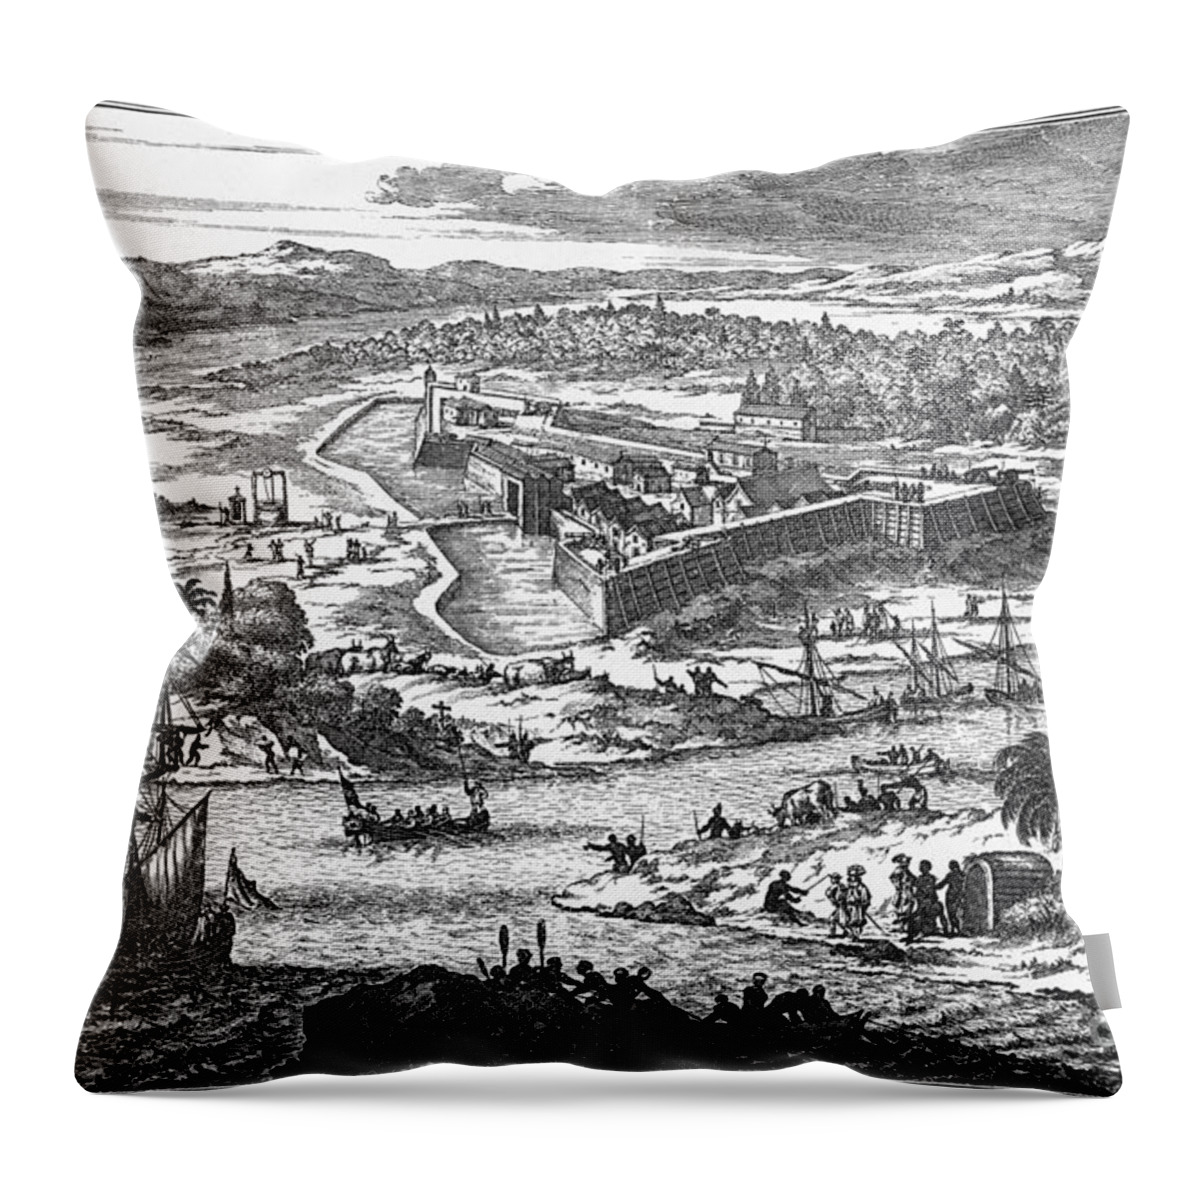 1673 Throw Pillow featuring the photograph Fort Caroline, 1673 by Granger